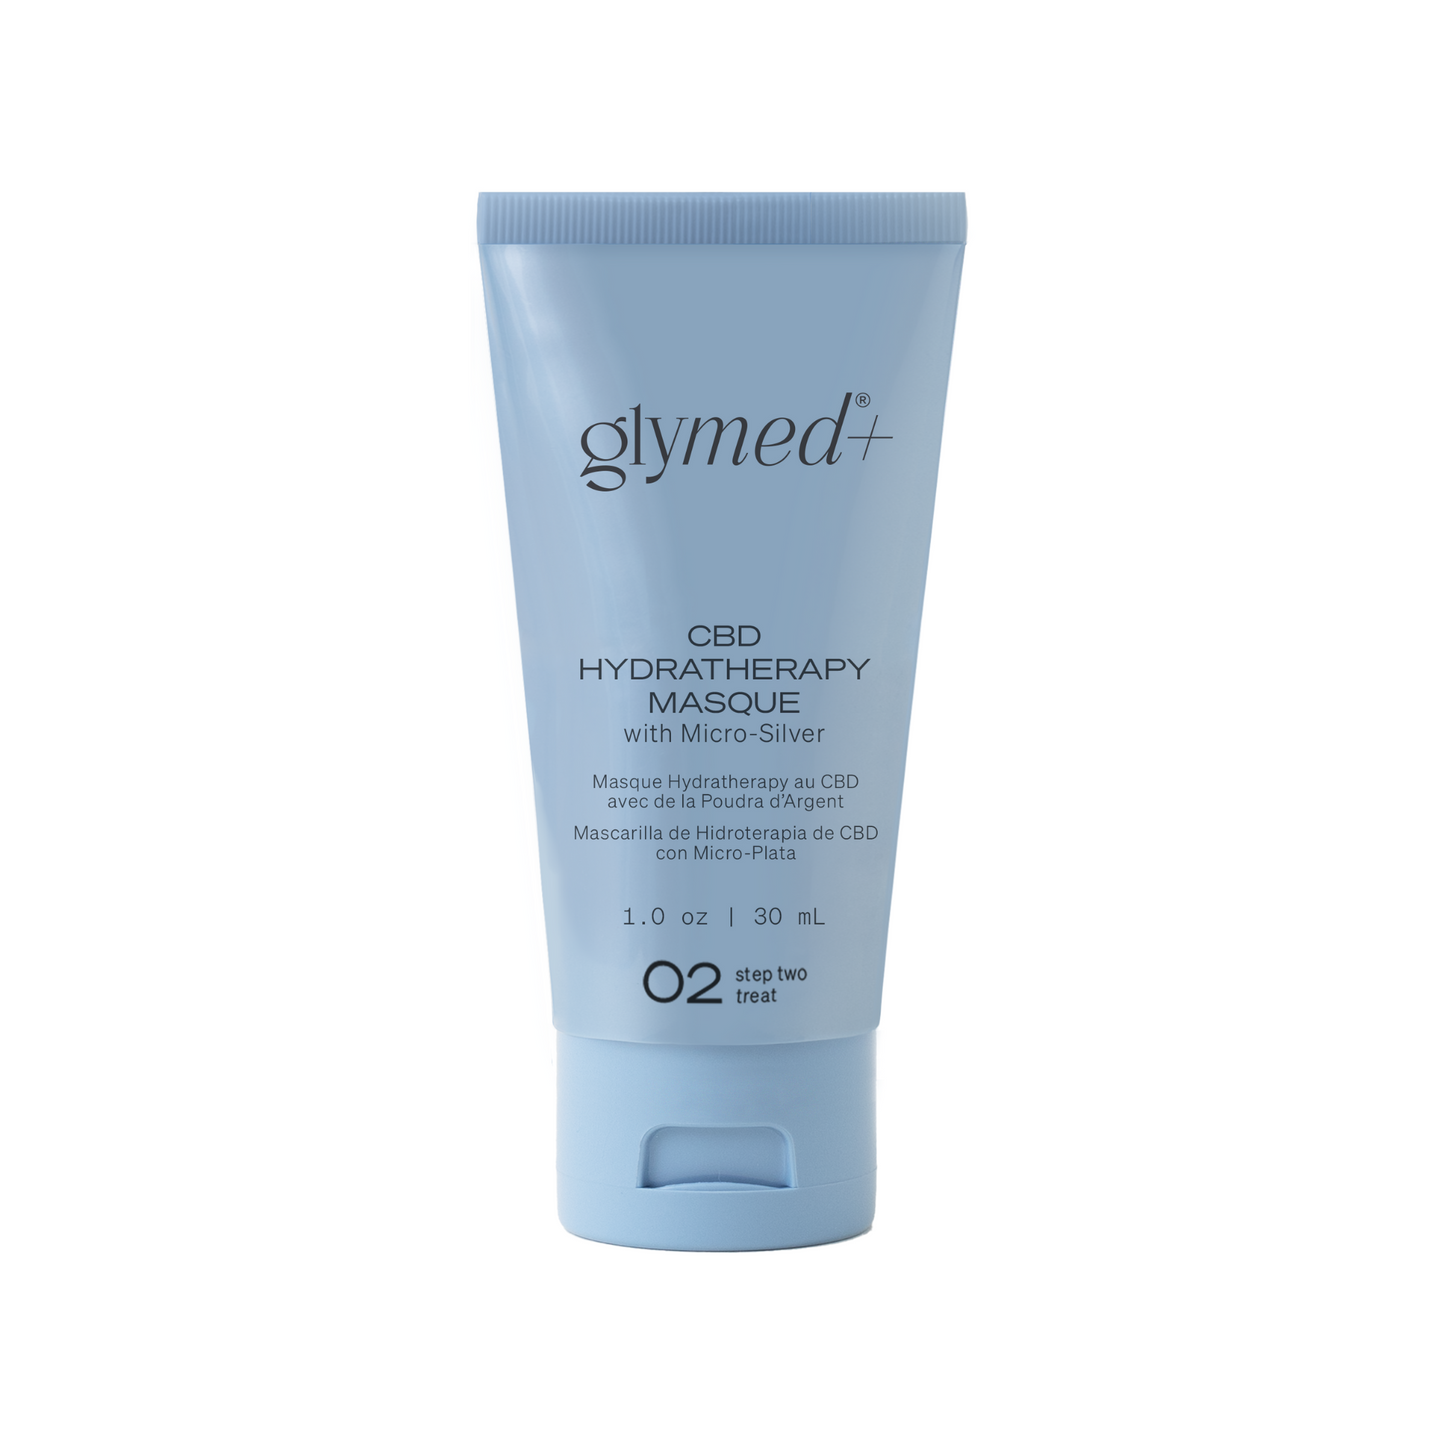 CBD Hydratherapy Masque With Micro-Silver | Glymed Plus